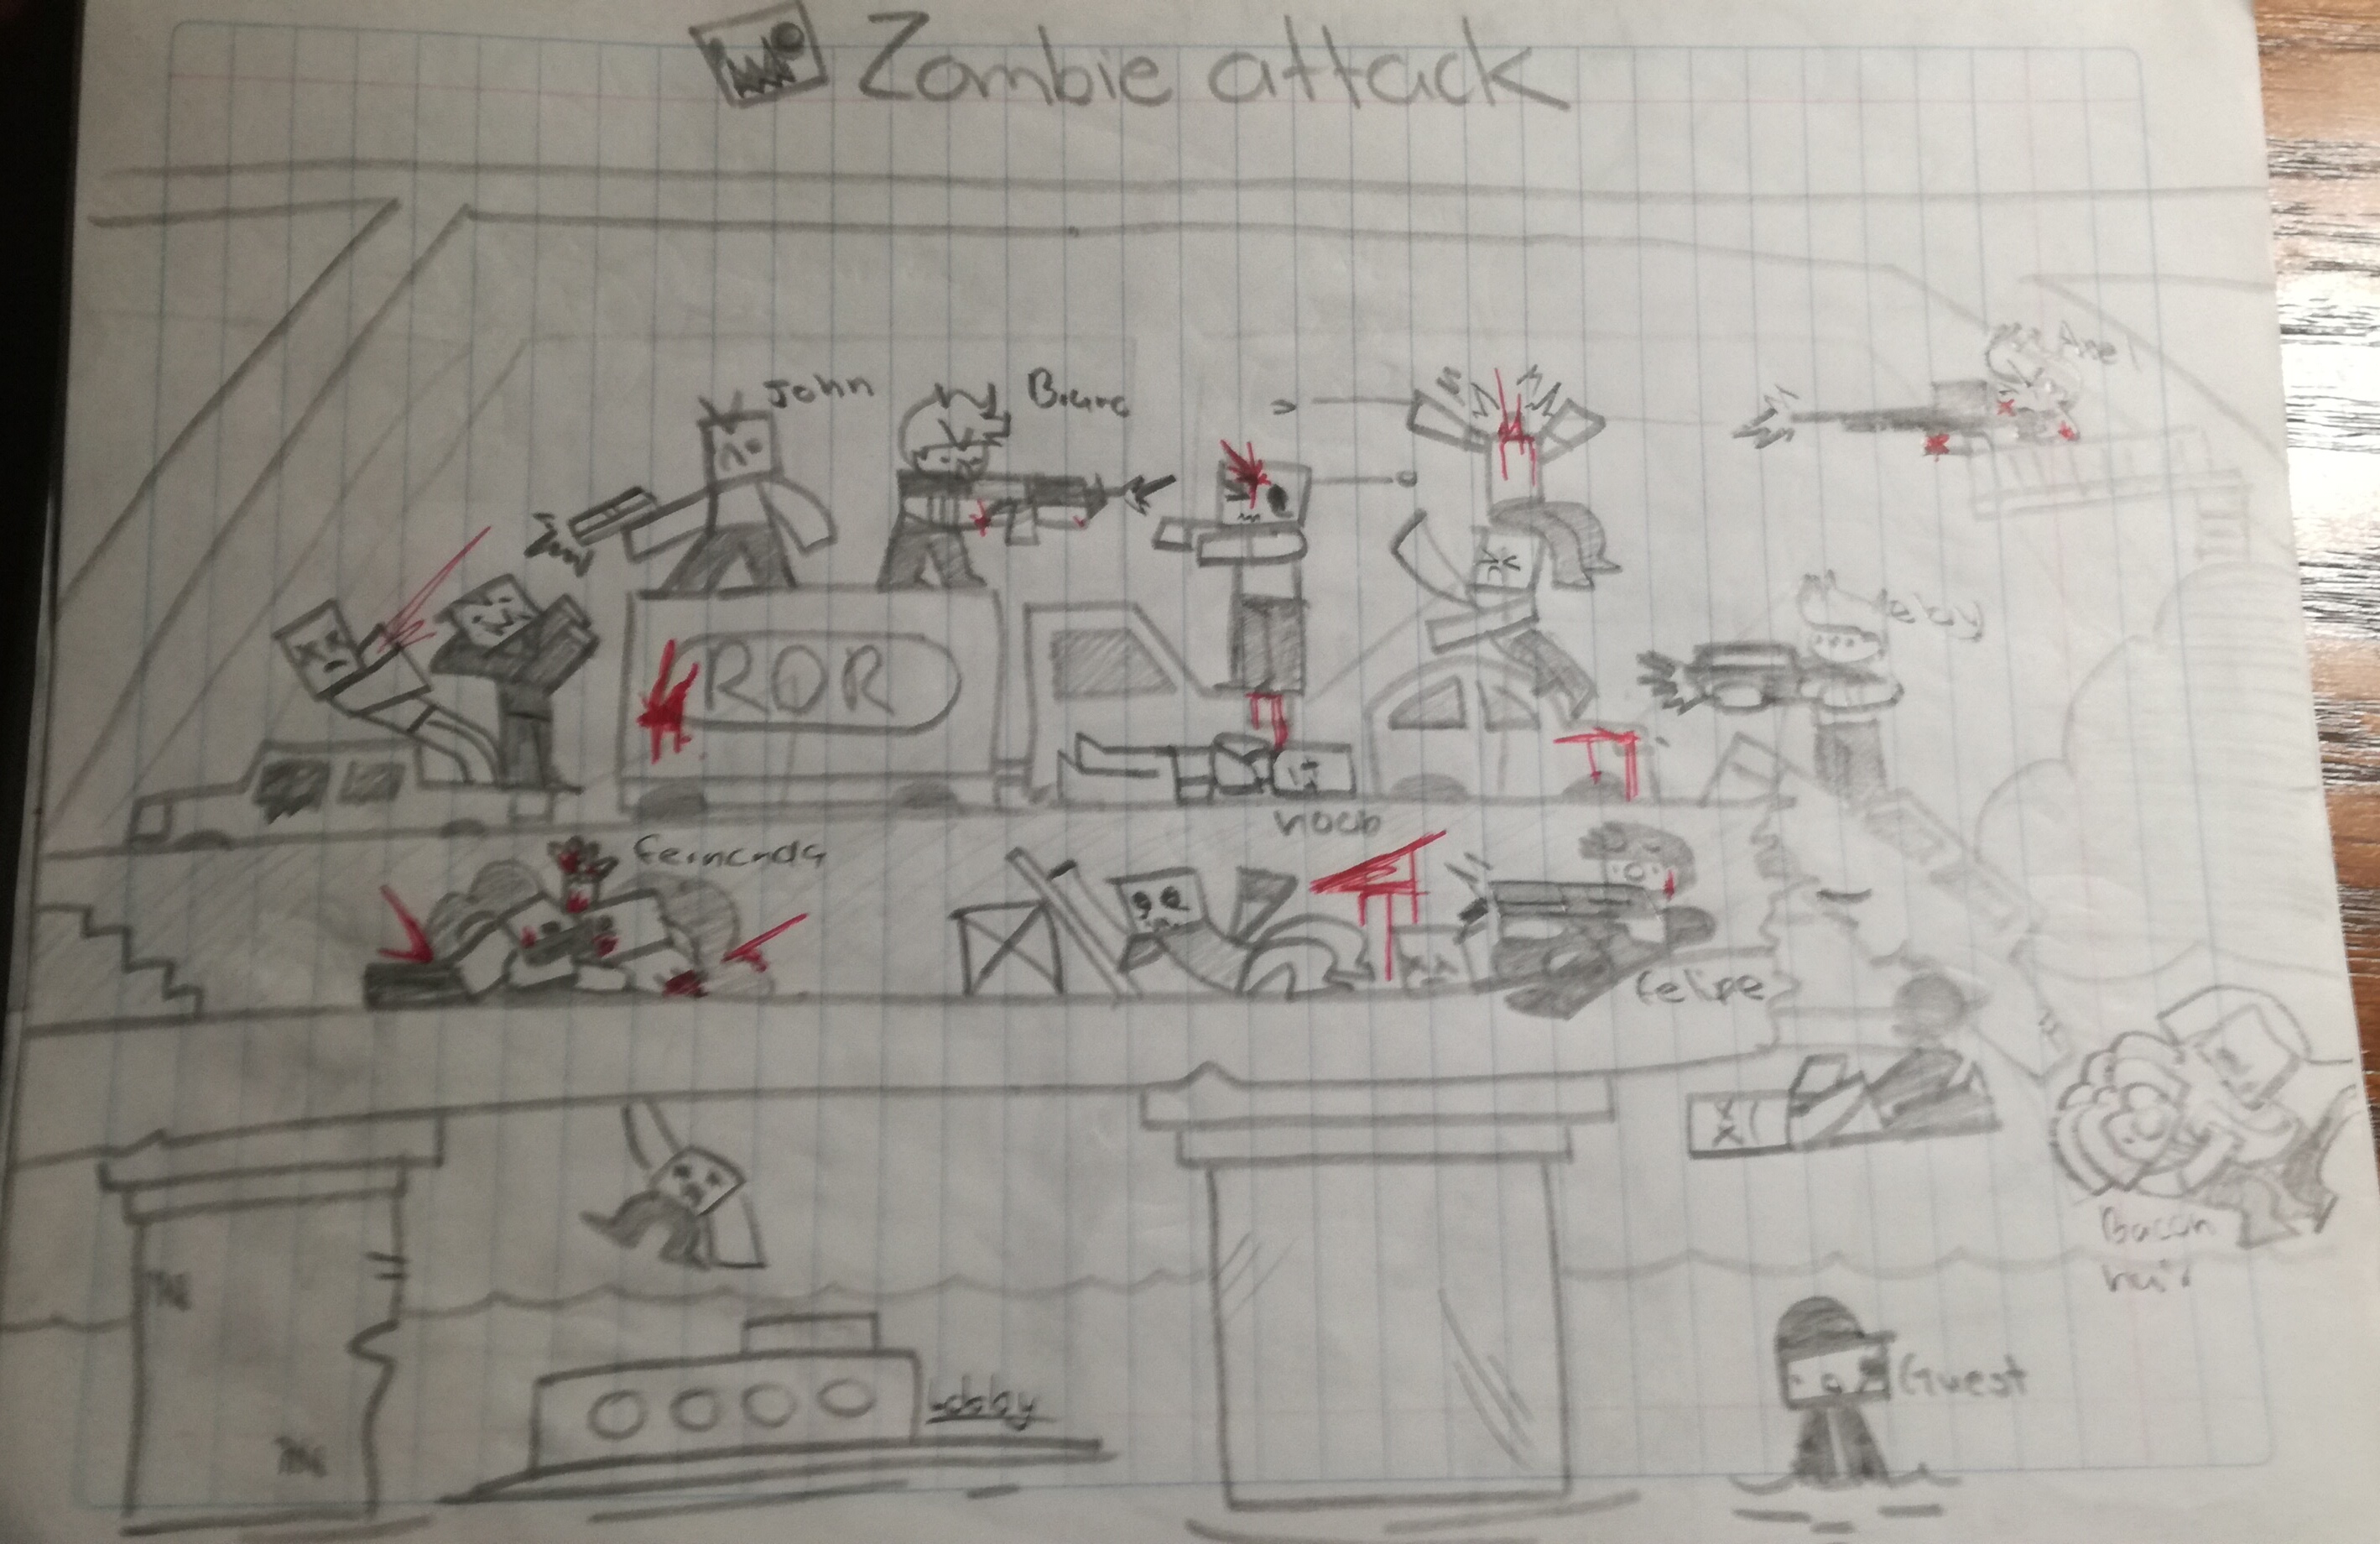 Scp 079 in zombie uprising from roblox by Alamillo01 on DeviantArt